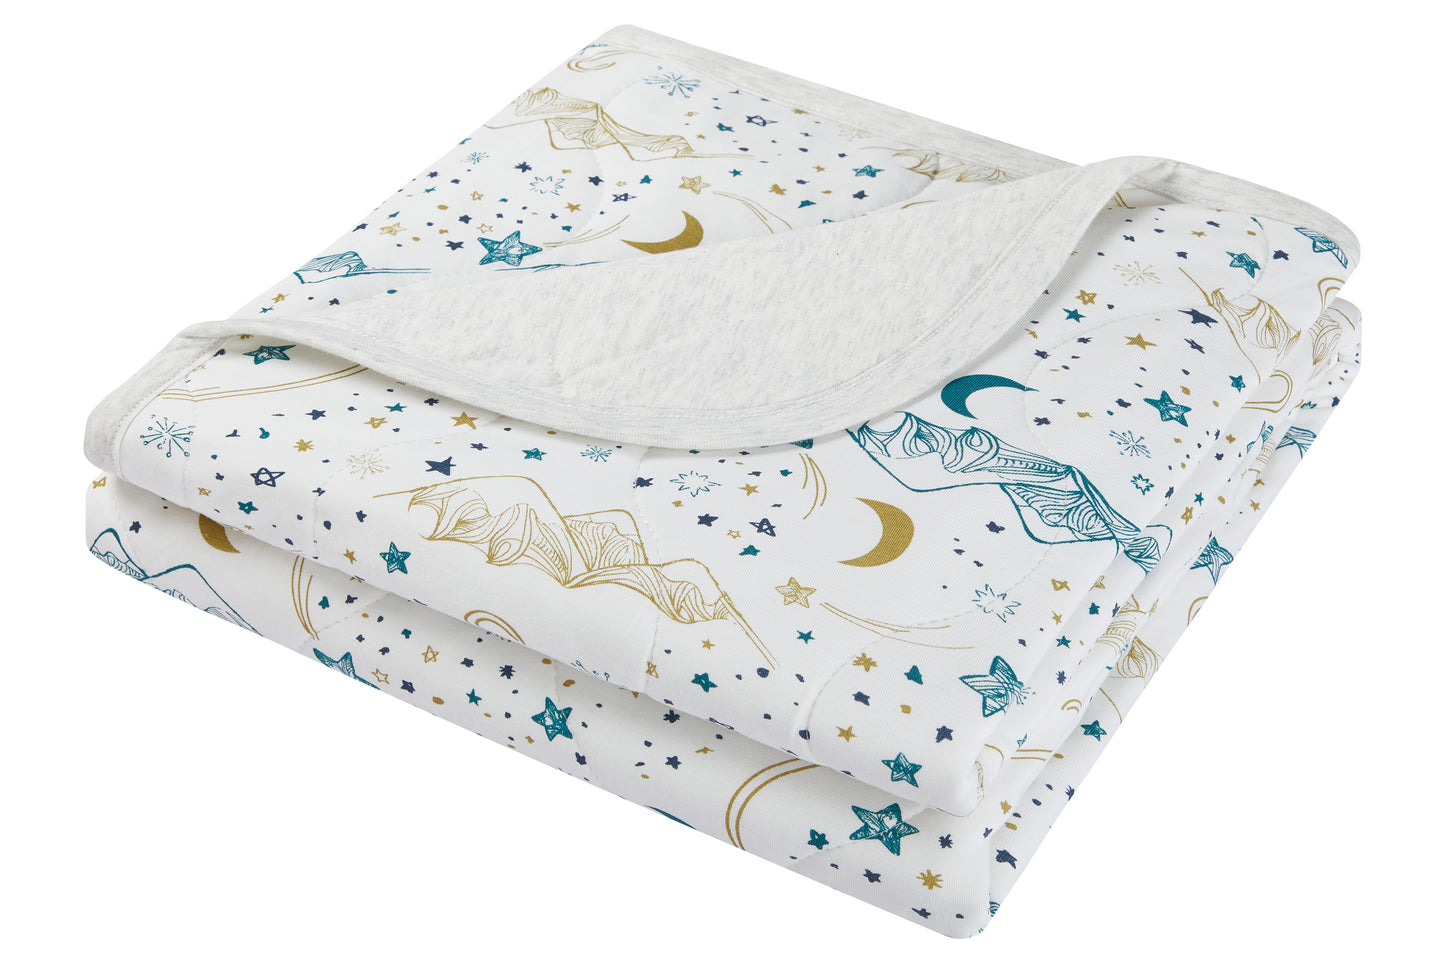 Small Quilted Winter Blanket 3.2 TOG (Bamboo Jersey) - Stars White